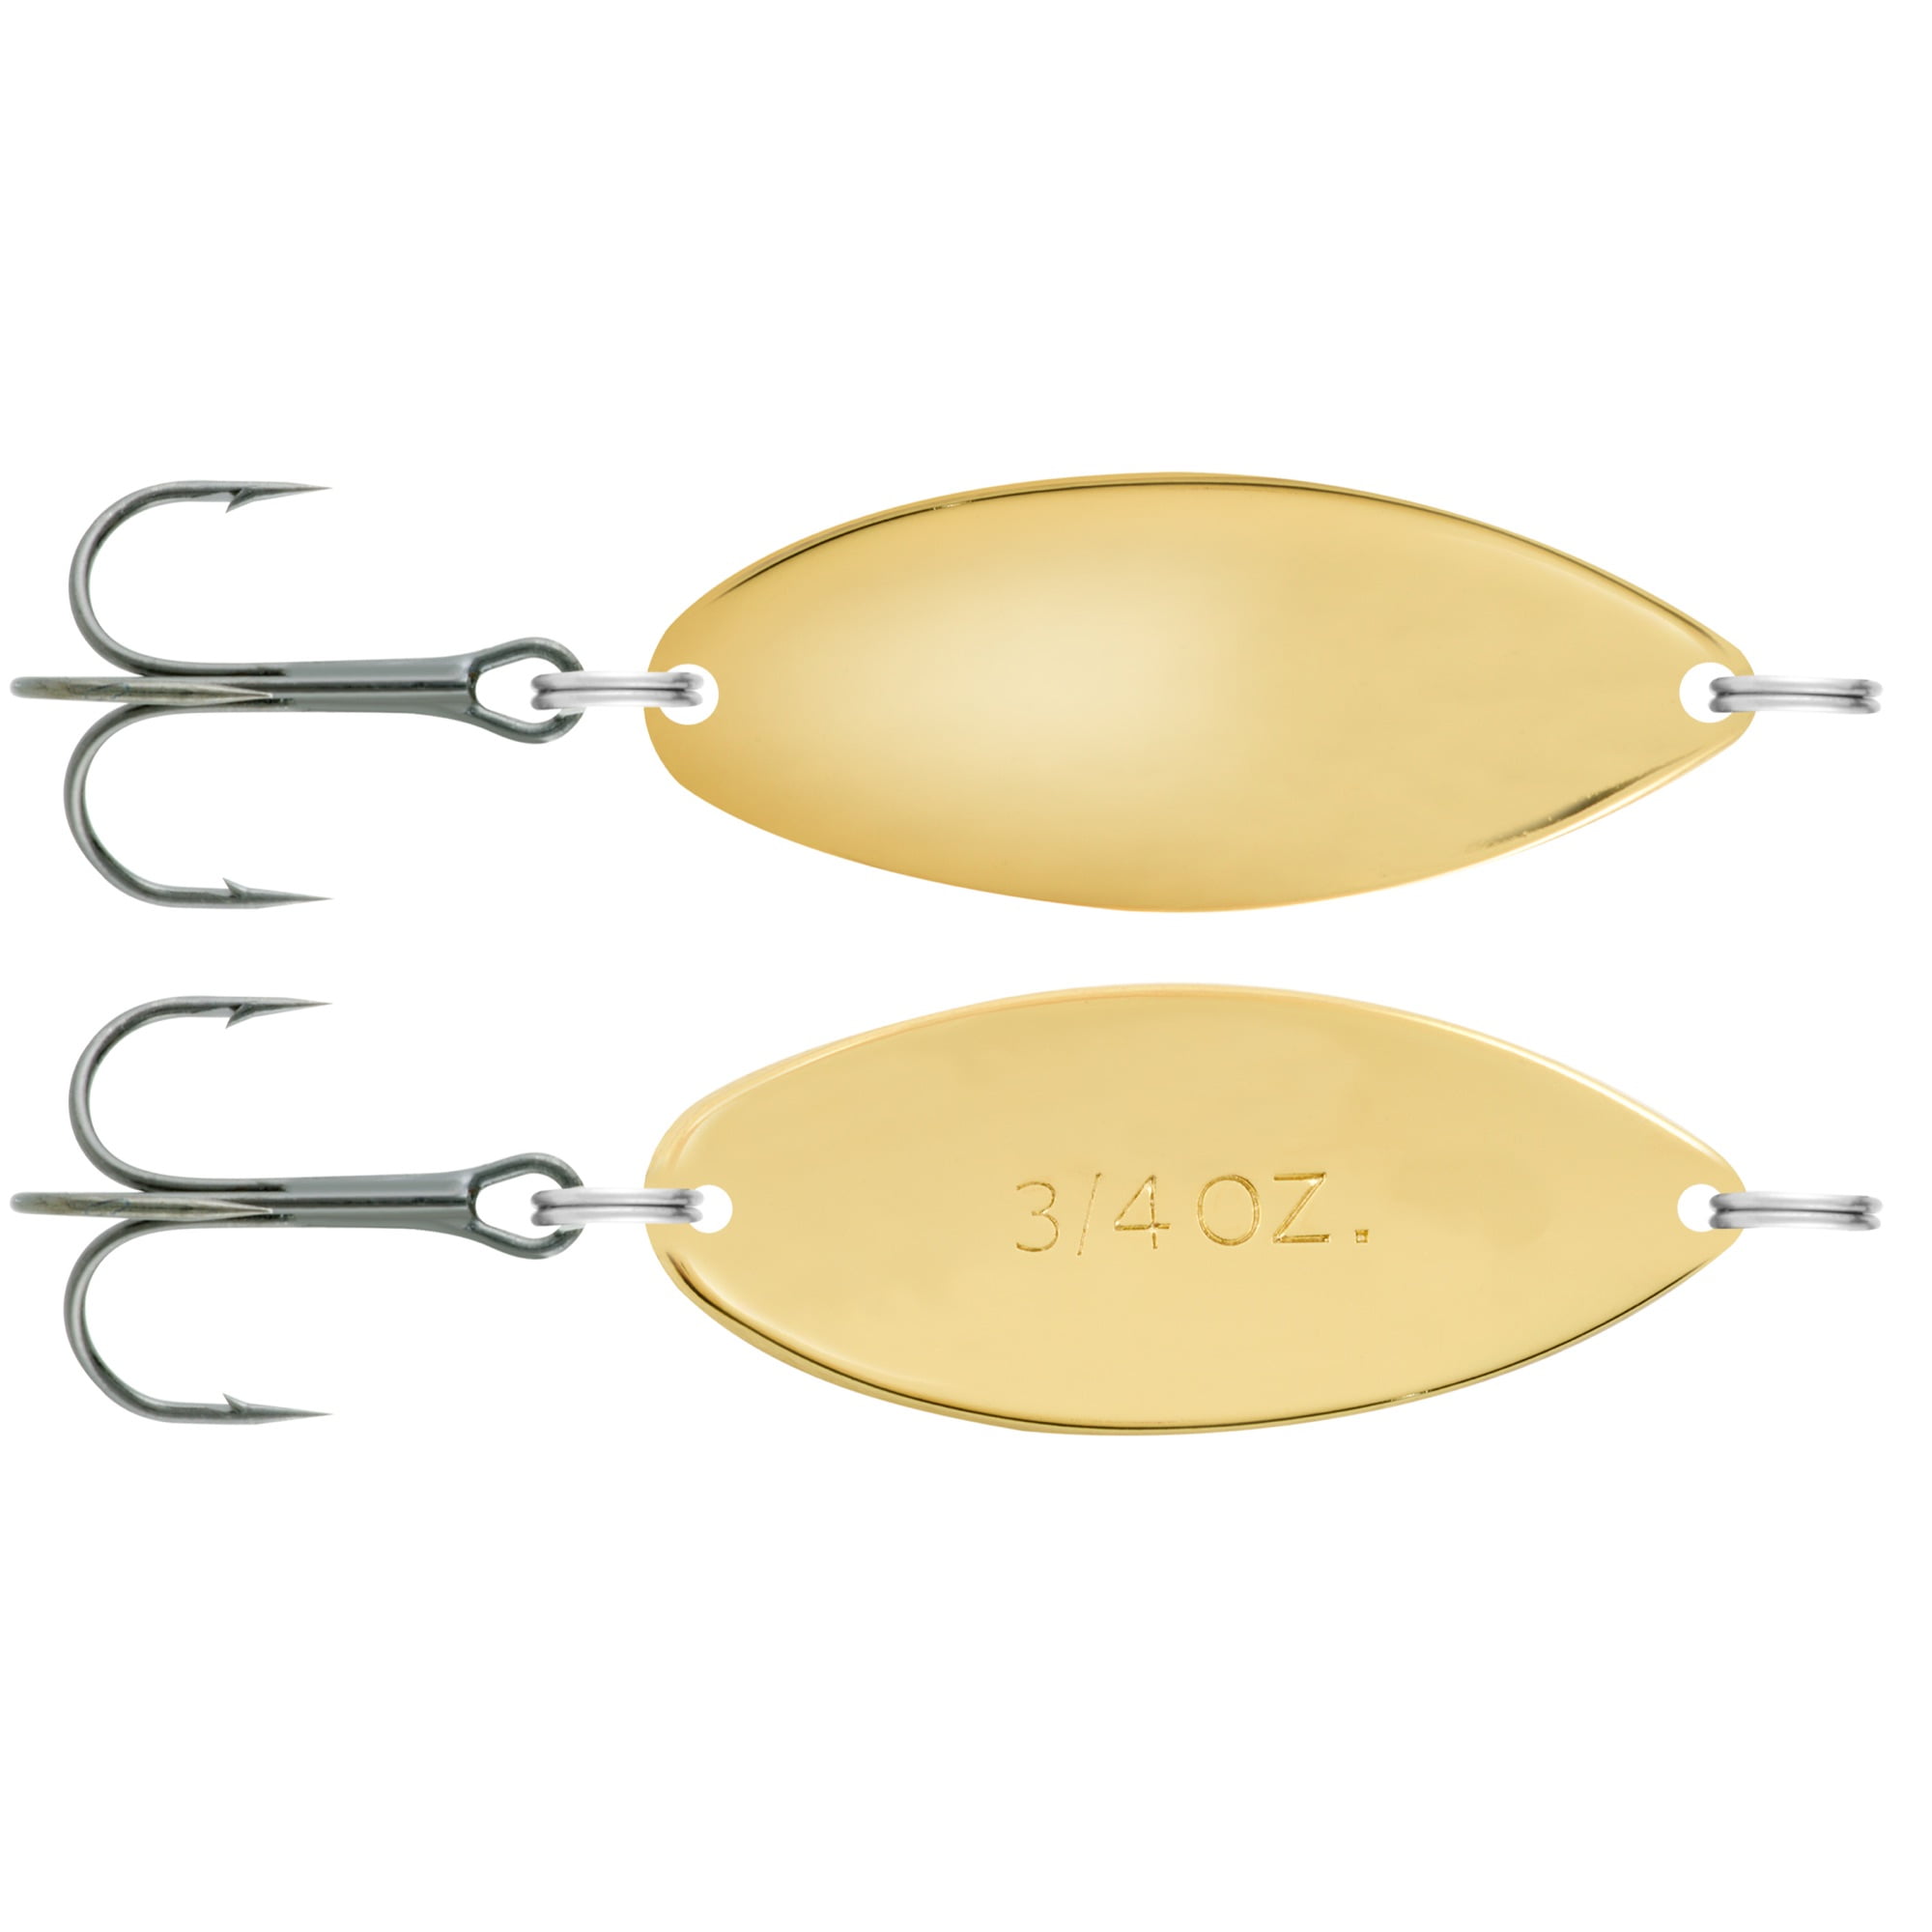 South Bend Kast-A-Way Freshwater Fishing Spoons, Gold, 3/4 oz